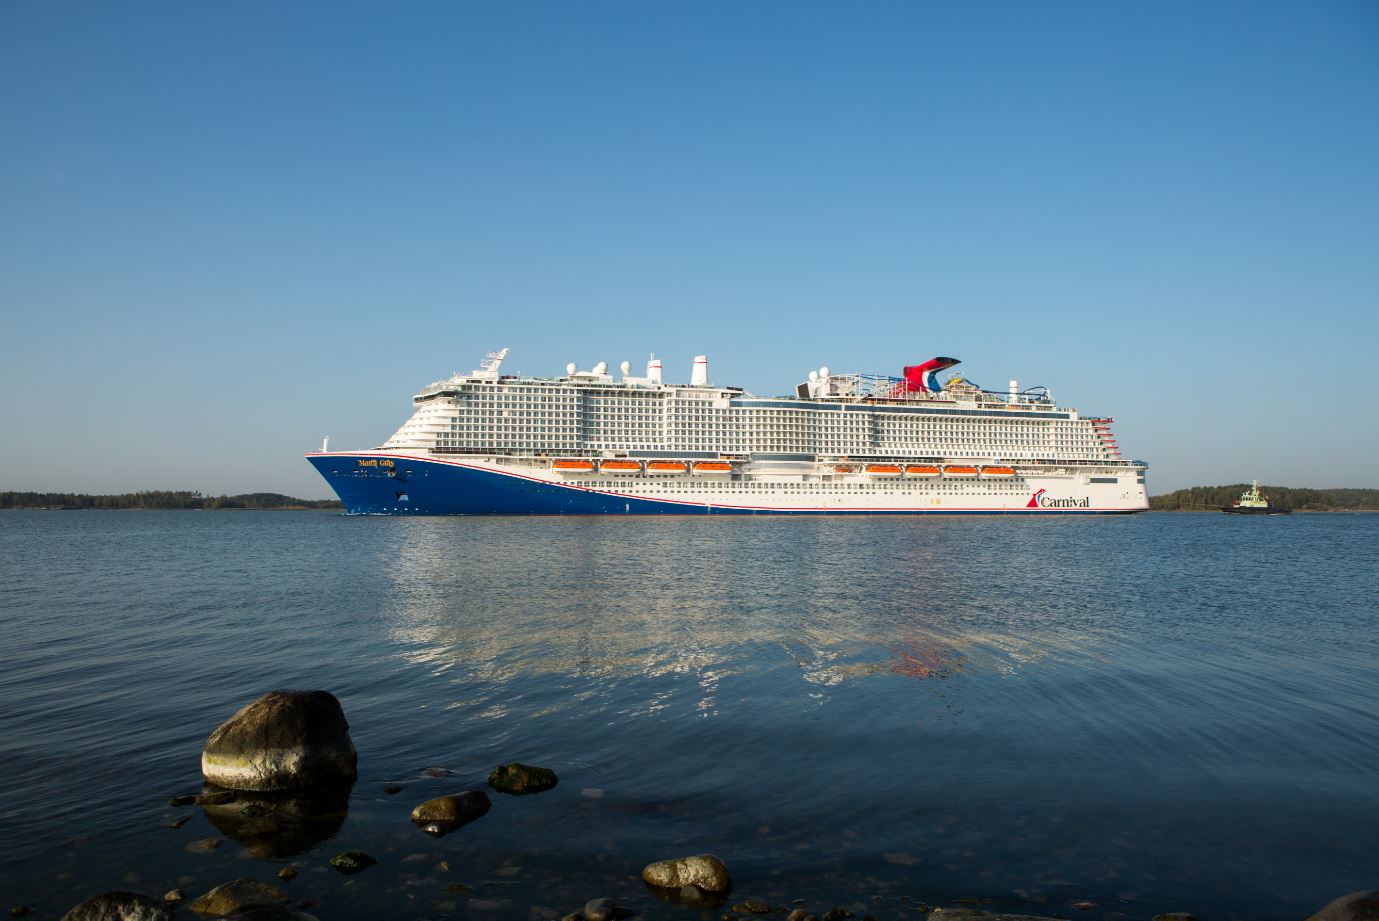 Carnival takes delivery of North America's first LNG-powered cruise ship